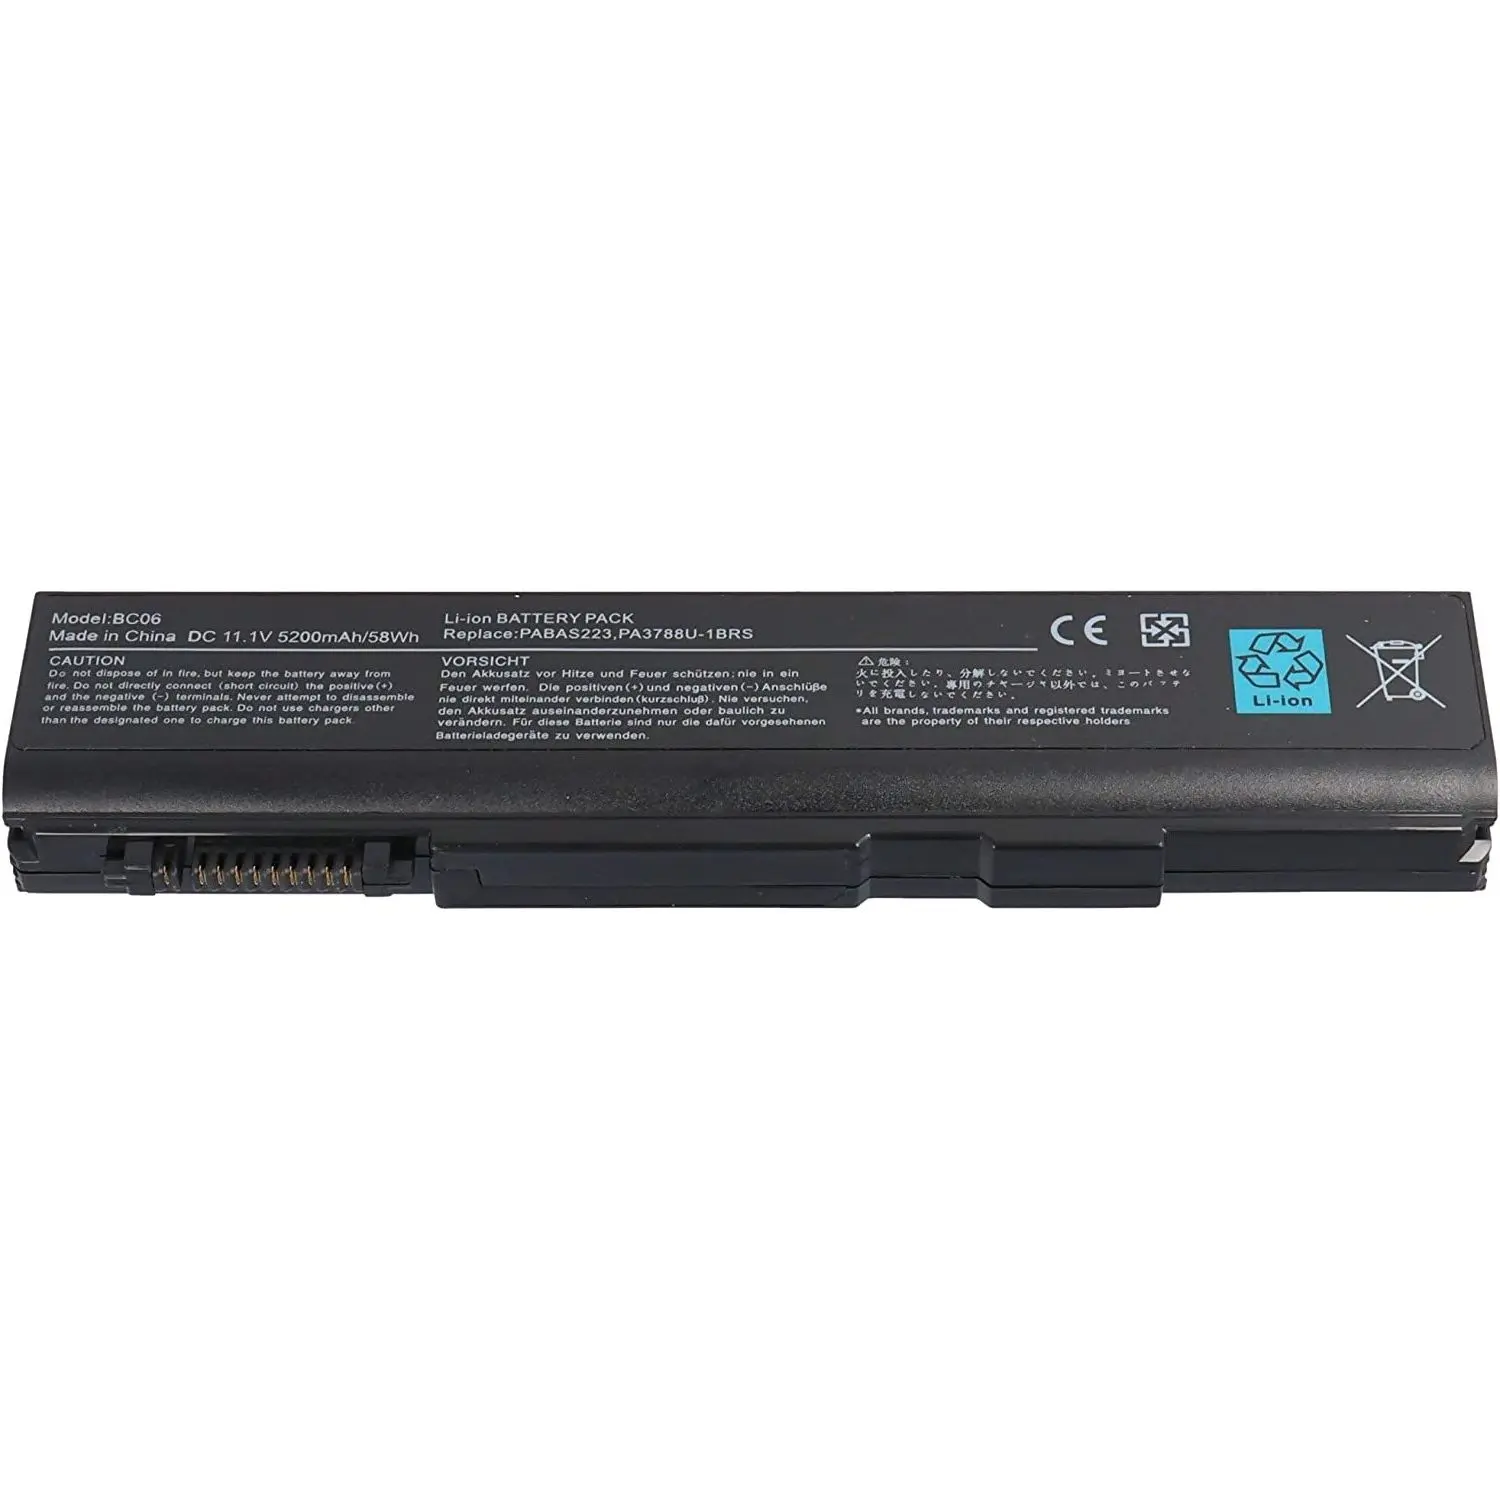 Replacement battery PA3788 for Toshiba Tecra series Batteries 4